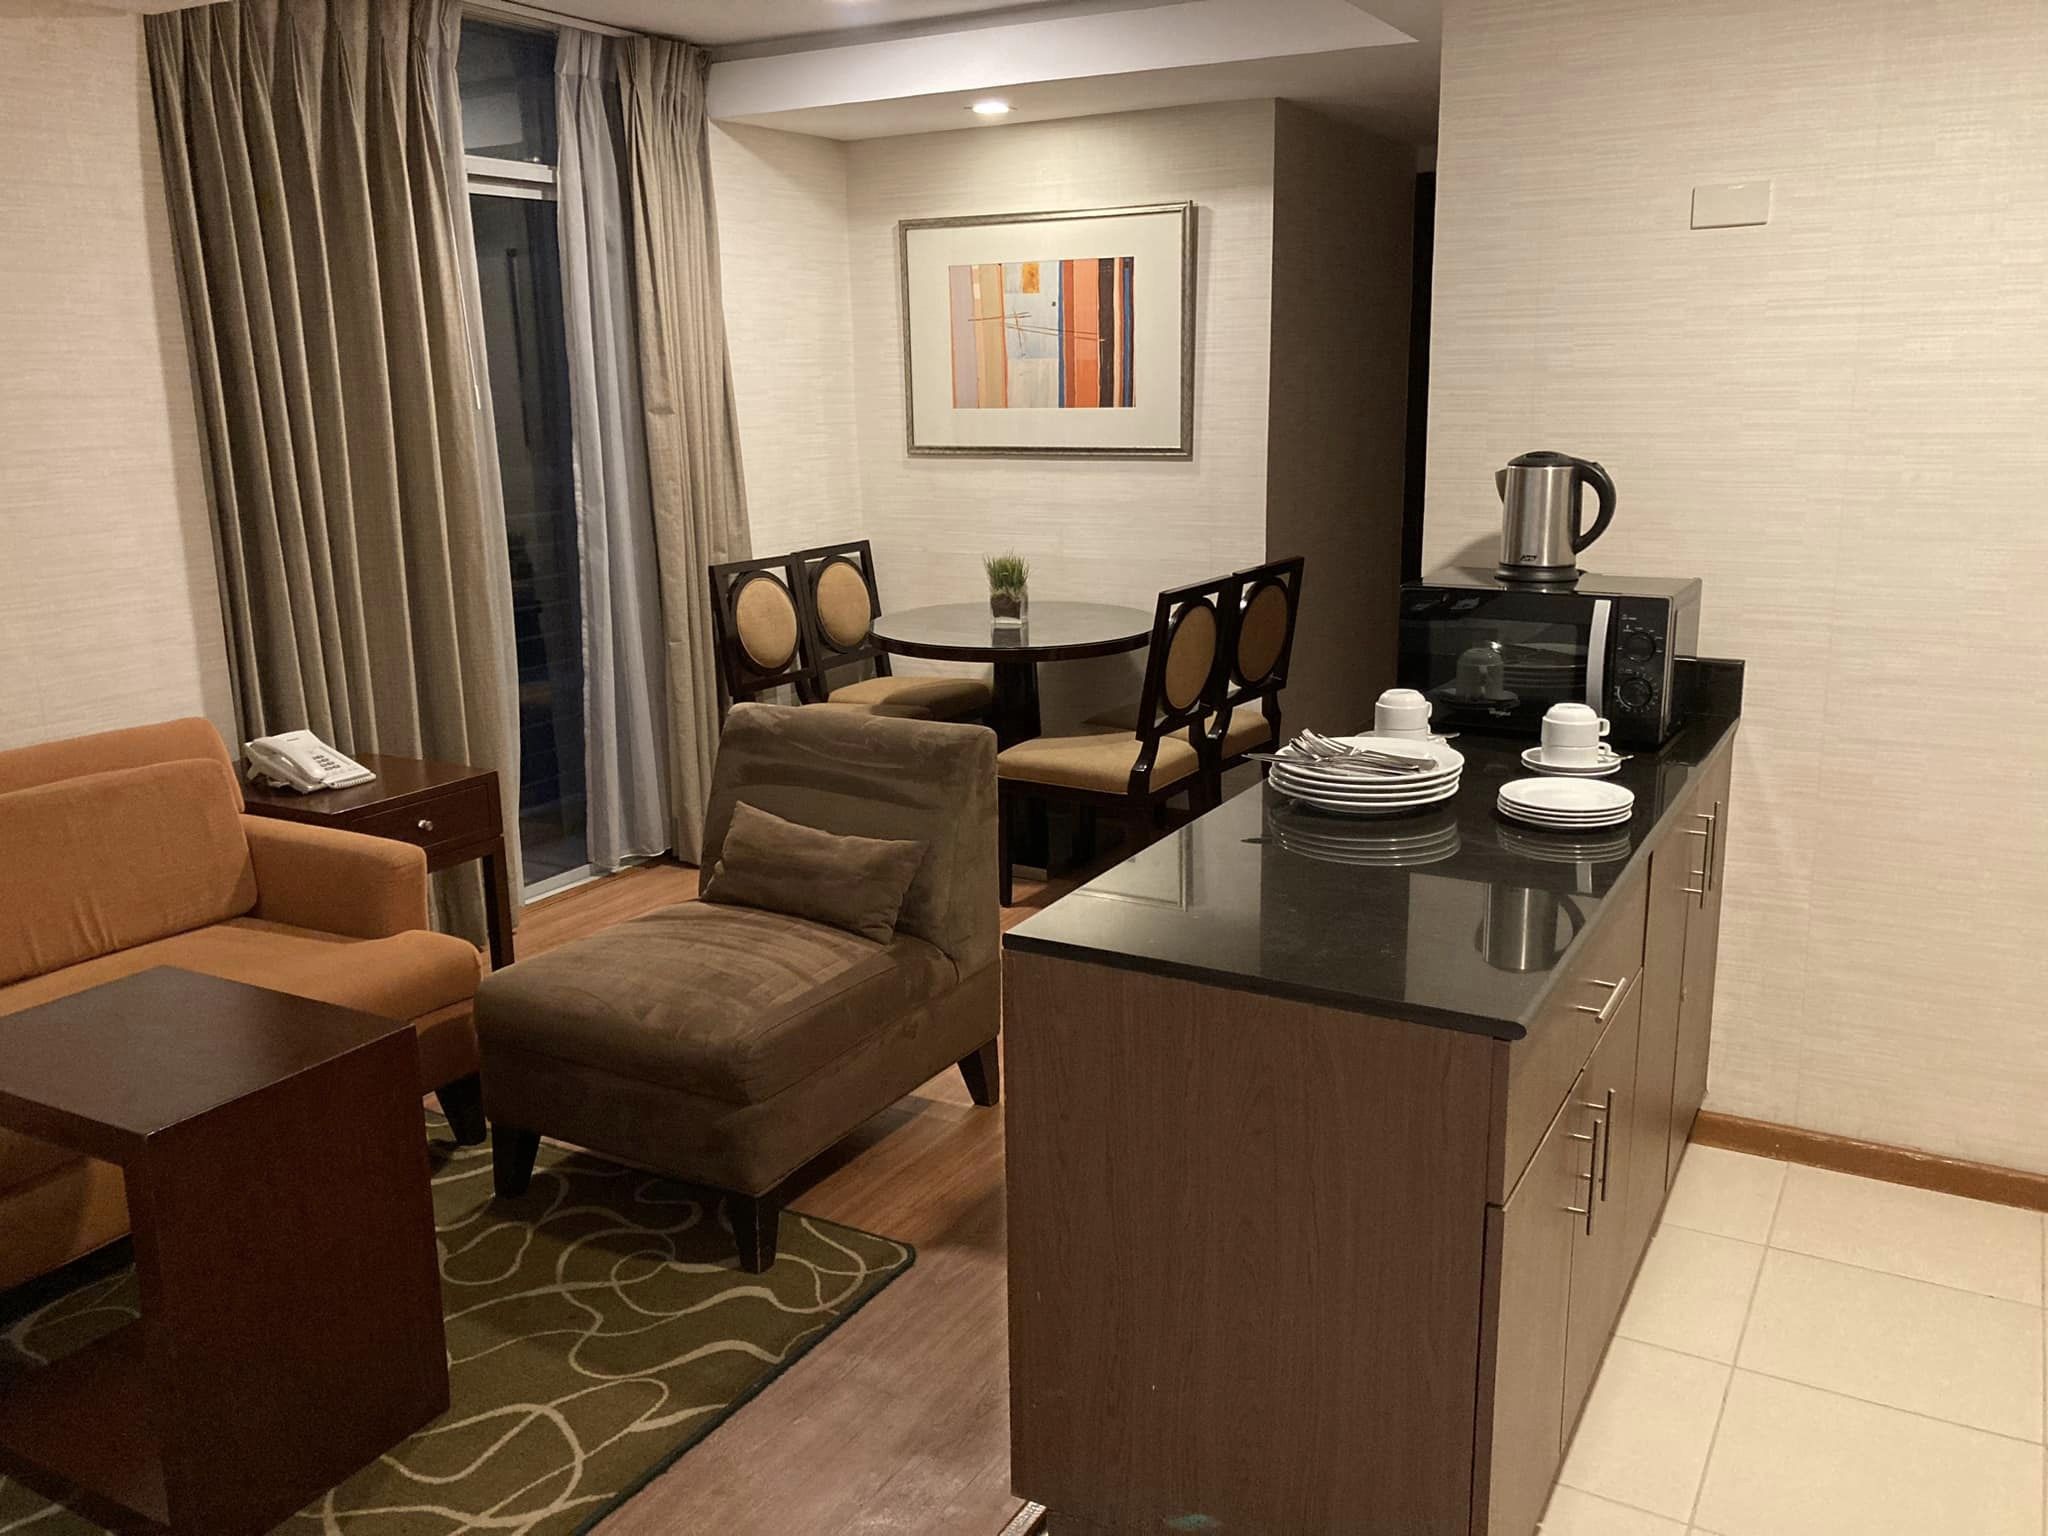 FOR RENT 2BR UNIT AT A.VENUE RESIDENCES MAKATI